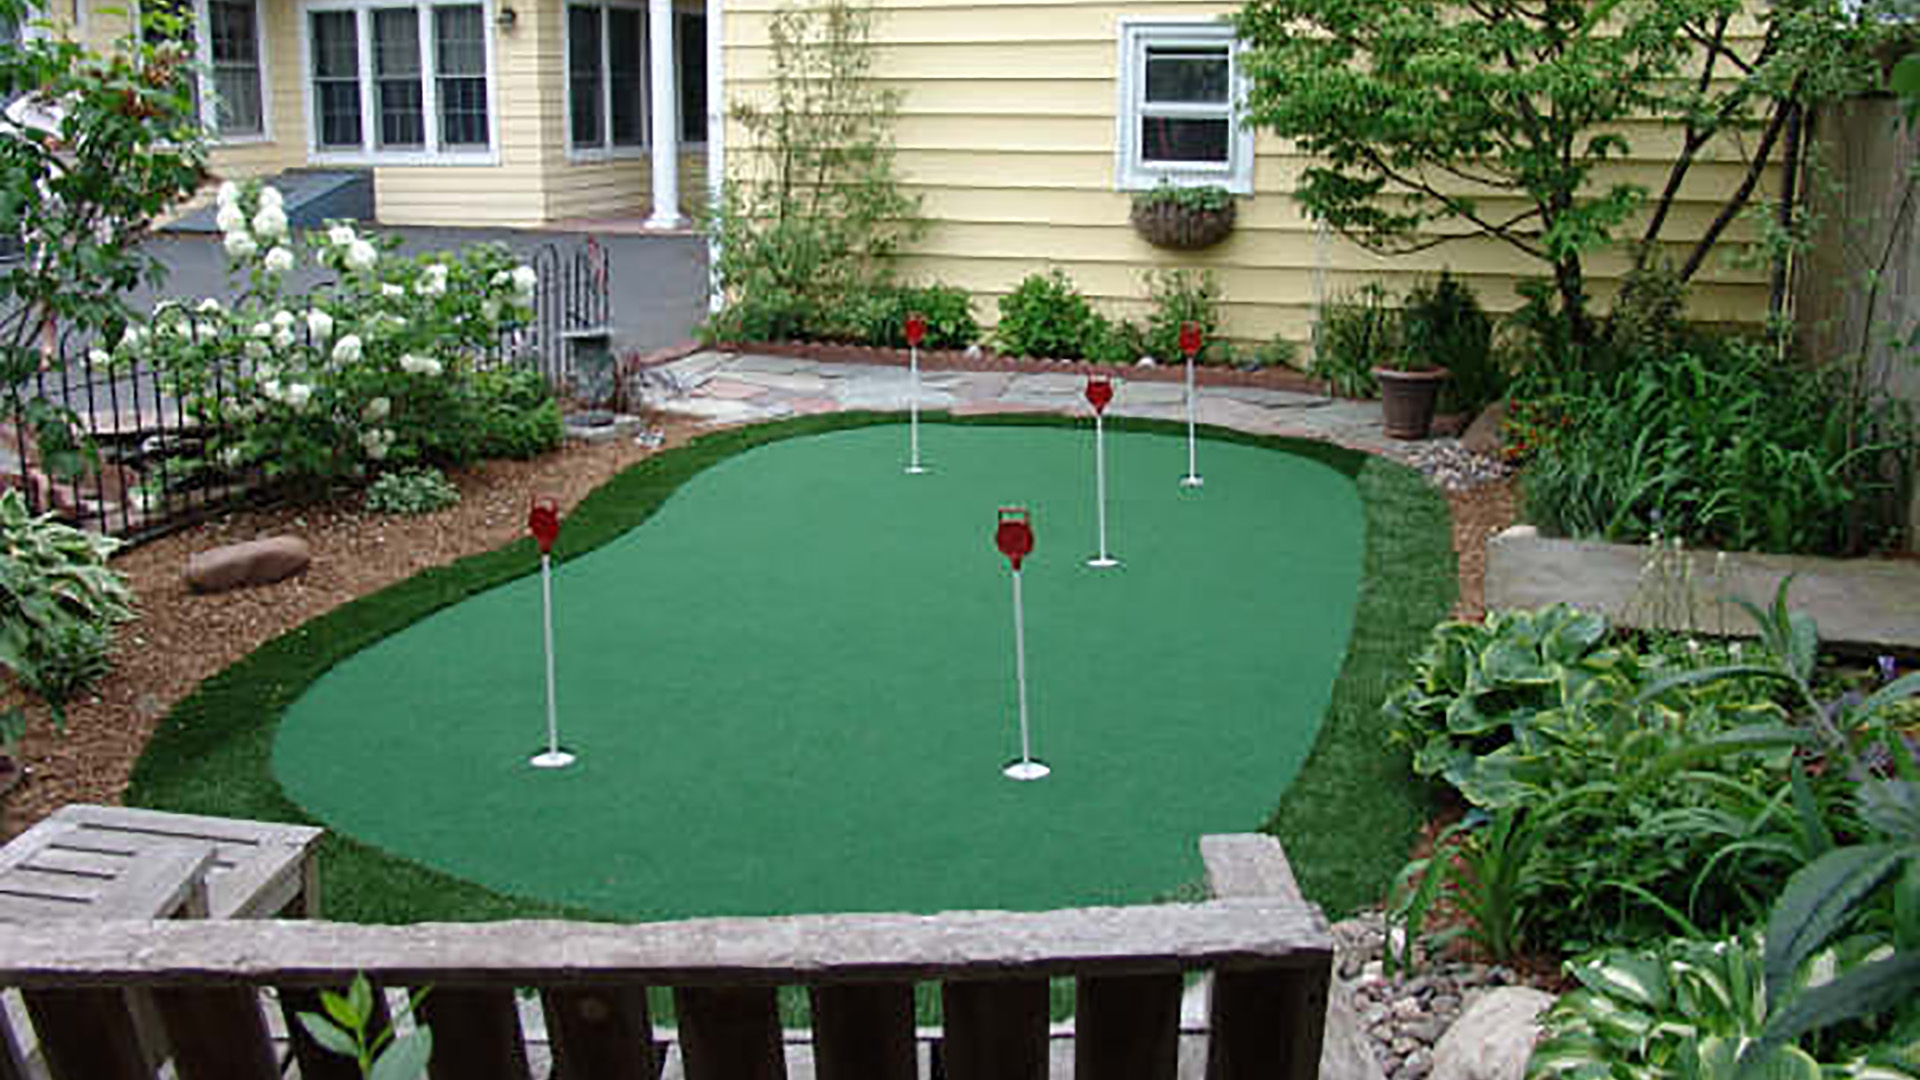 15 X 20 5 Hole Pro Backyard Or Indoor Putting Green Made From The Worlds Best Turf Starpro Greens